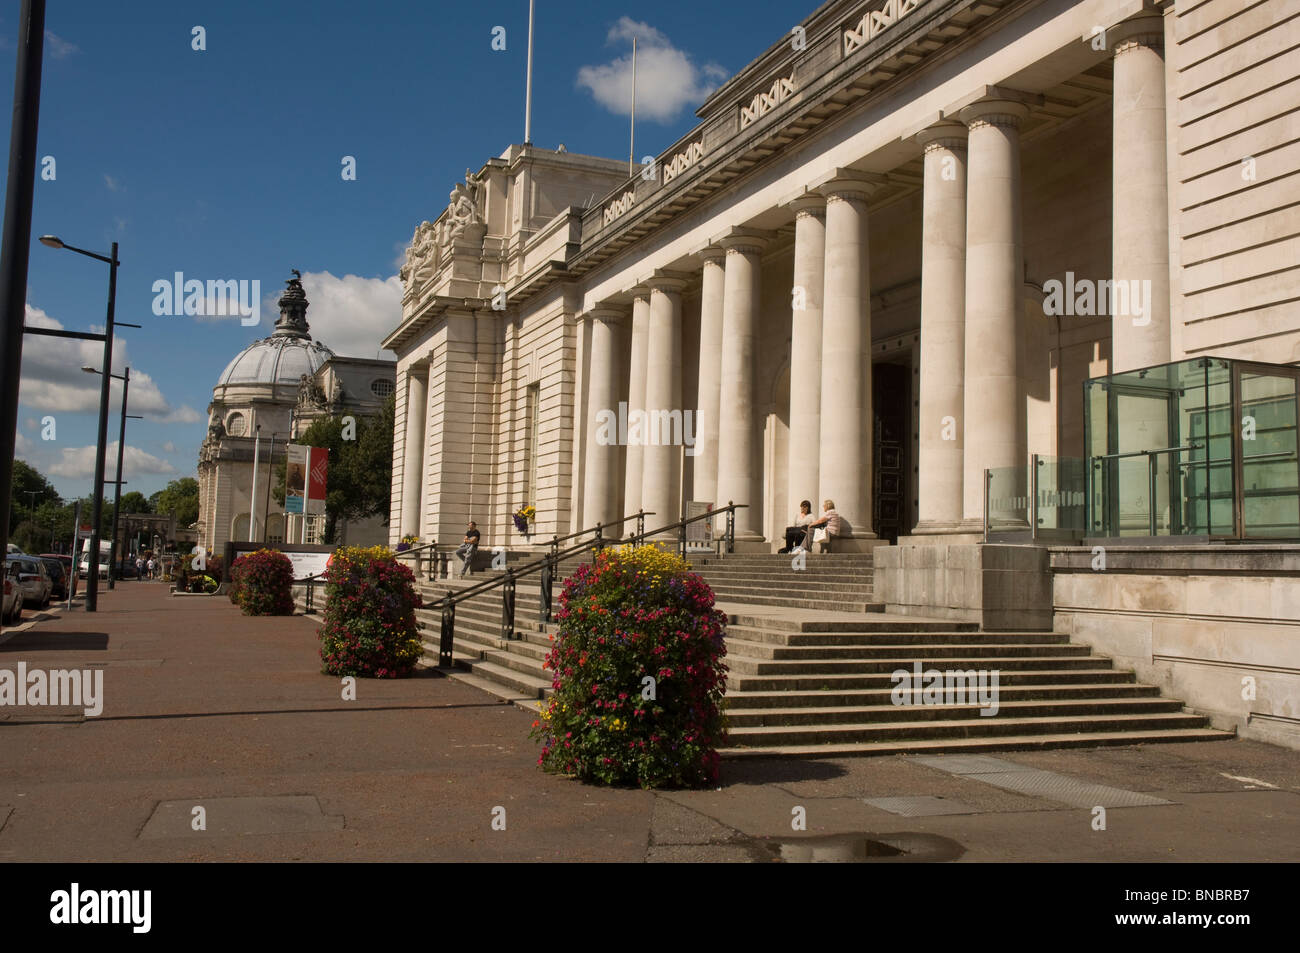 National Museum of Wales, Cardiff, Pays de Galles, Royaume-Uni, Europe Banque D'Images